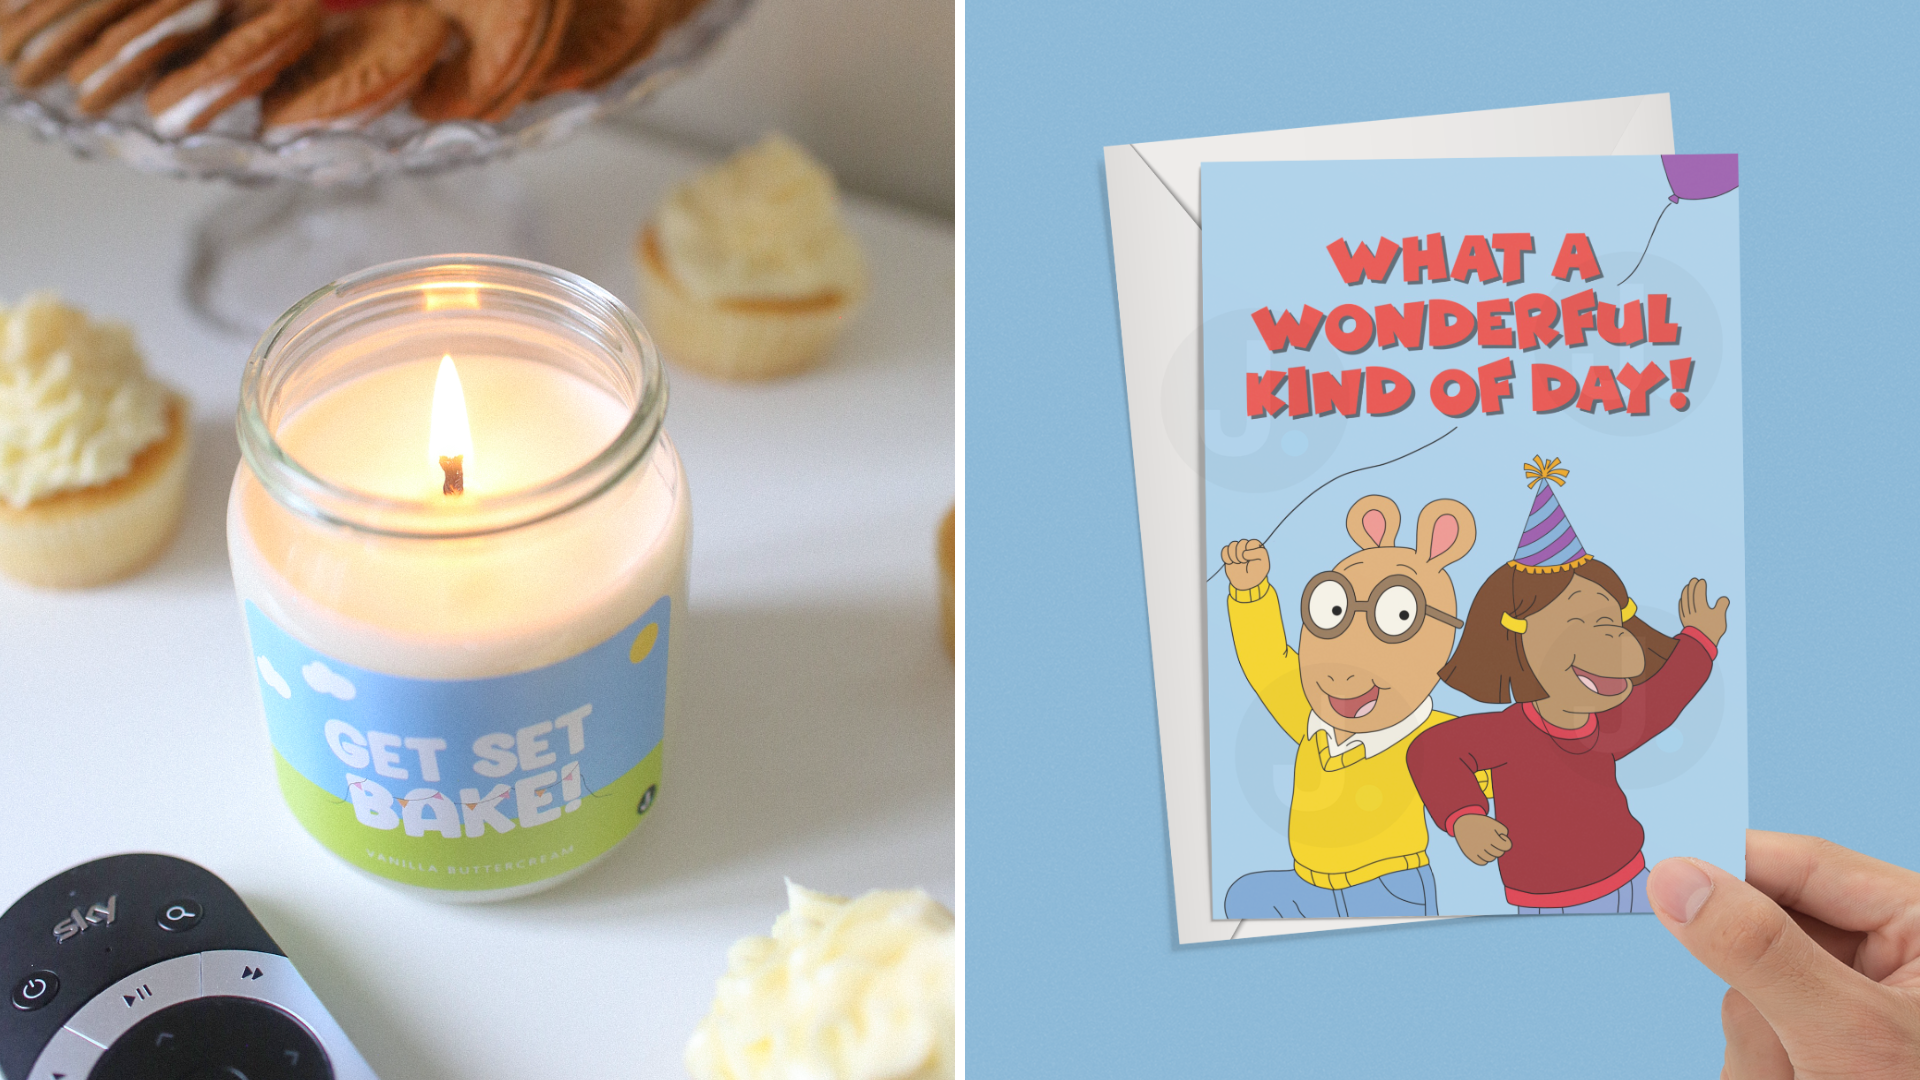 The Perfect Birthday Cards And Gifts Your Friends Will Appreciate - Birthday Gifts